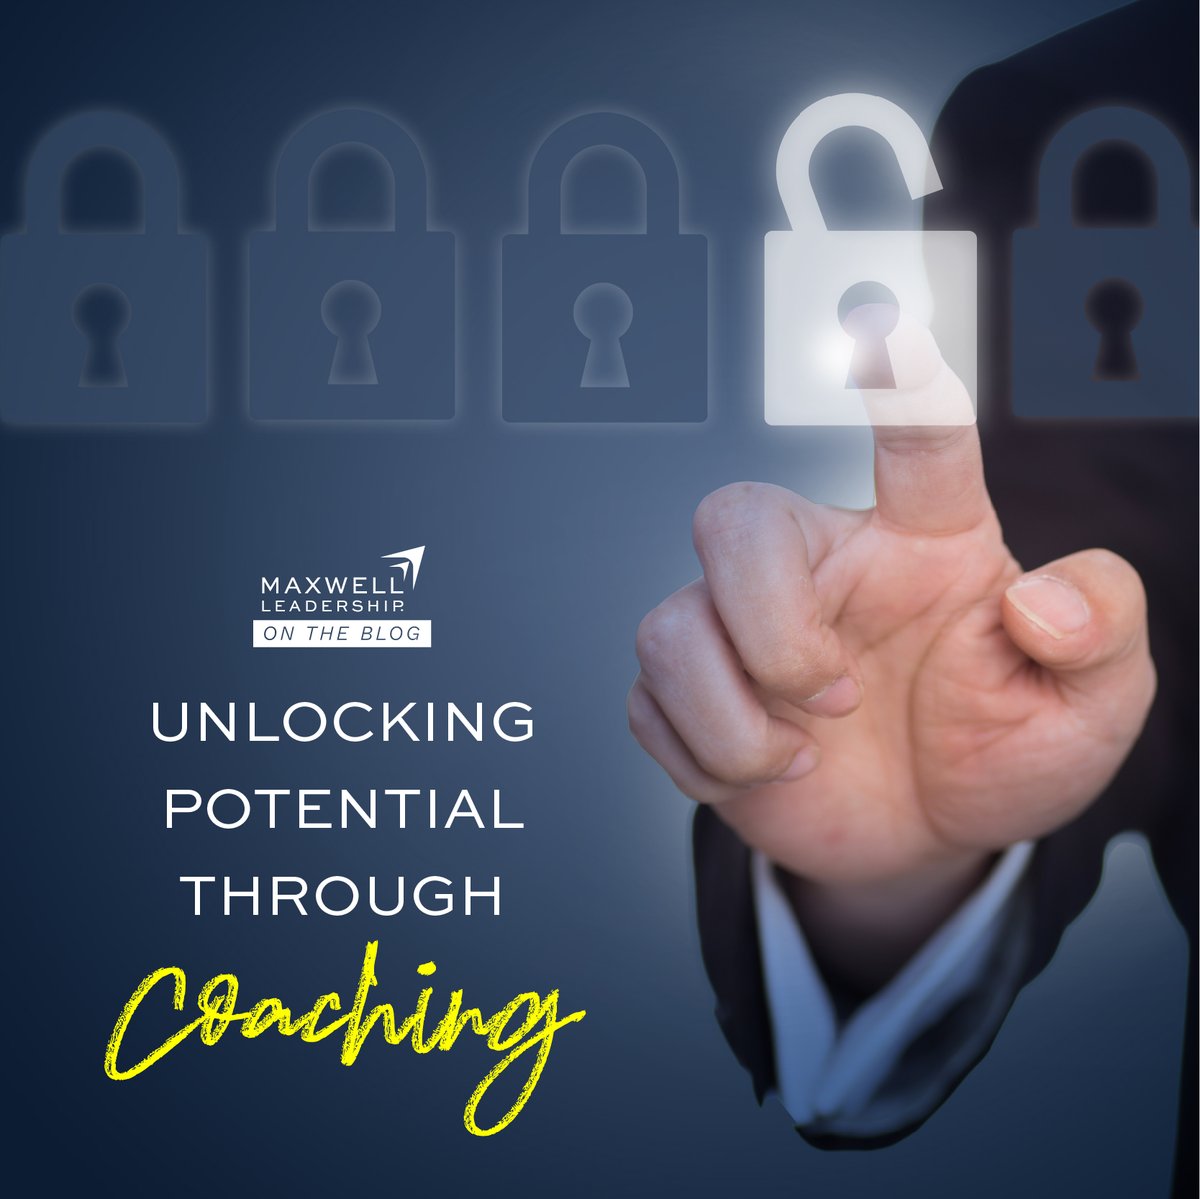 🔓 Unlock your team's potential! Our latest blog focuses on how becoming a coaching leader can foster growth within your team, featuring insightful tips from our hosts. Don't miss this! 👉 bit.ly/3JYkWUm
#CoachingForGrowth #LeadWell #TeamDevelopment